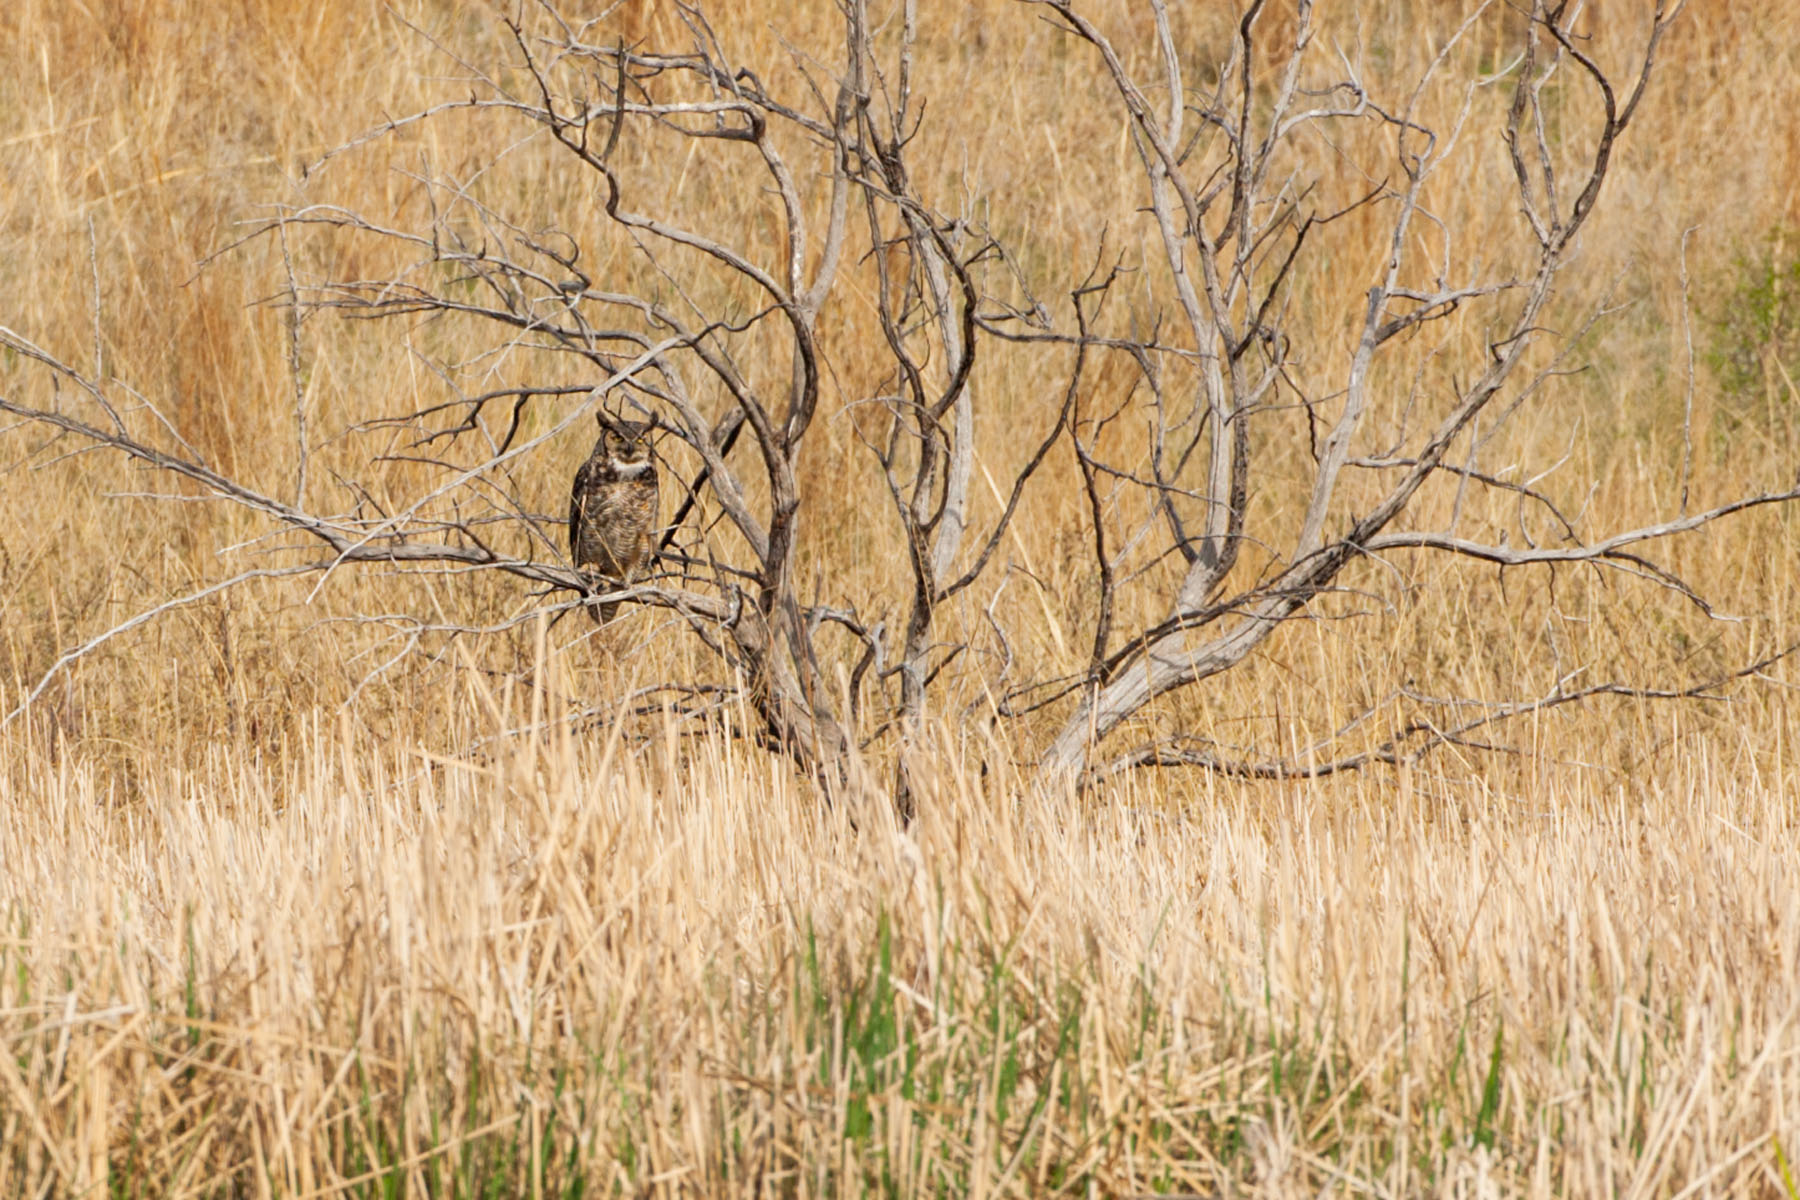 Great Horned Owl roosting, Quivira NWR, Kansas.  Click for next photo.